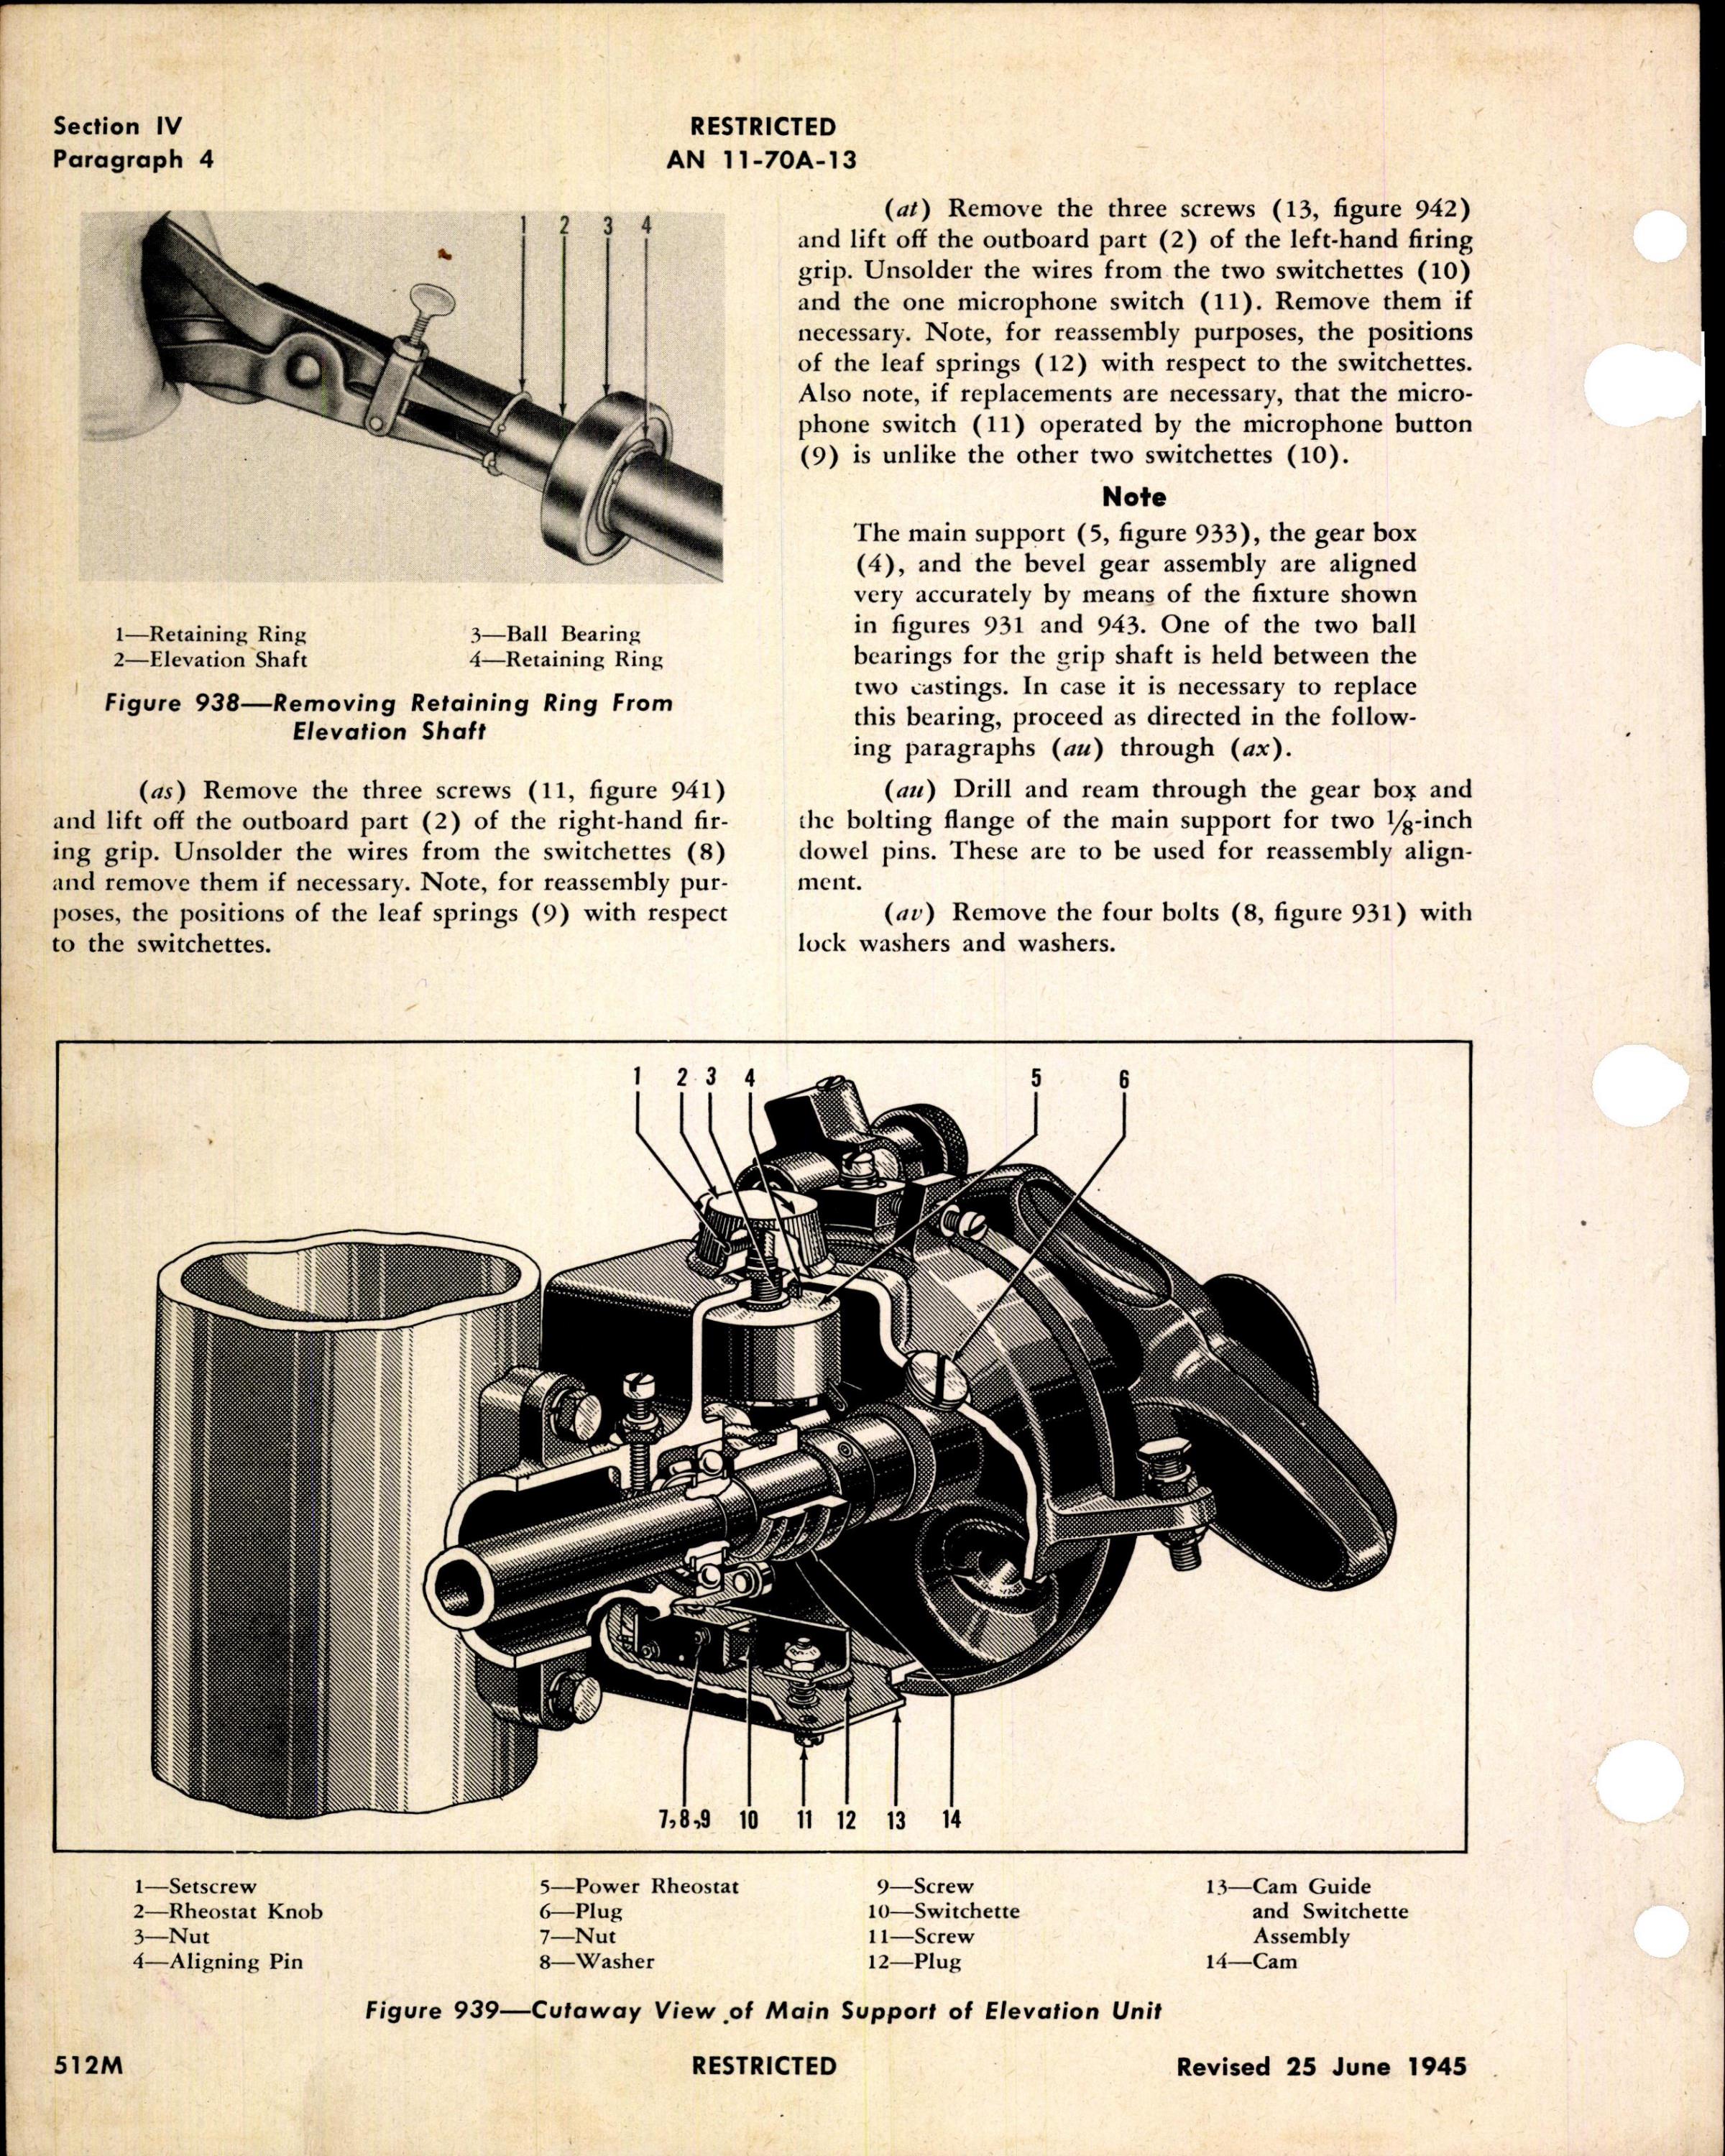 Sample page 4 from AirCorps Library document: Fire Control System - Repair of Automatic Gun Charger